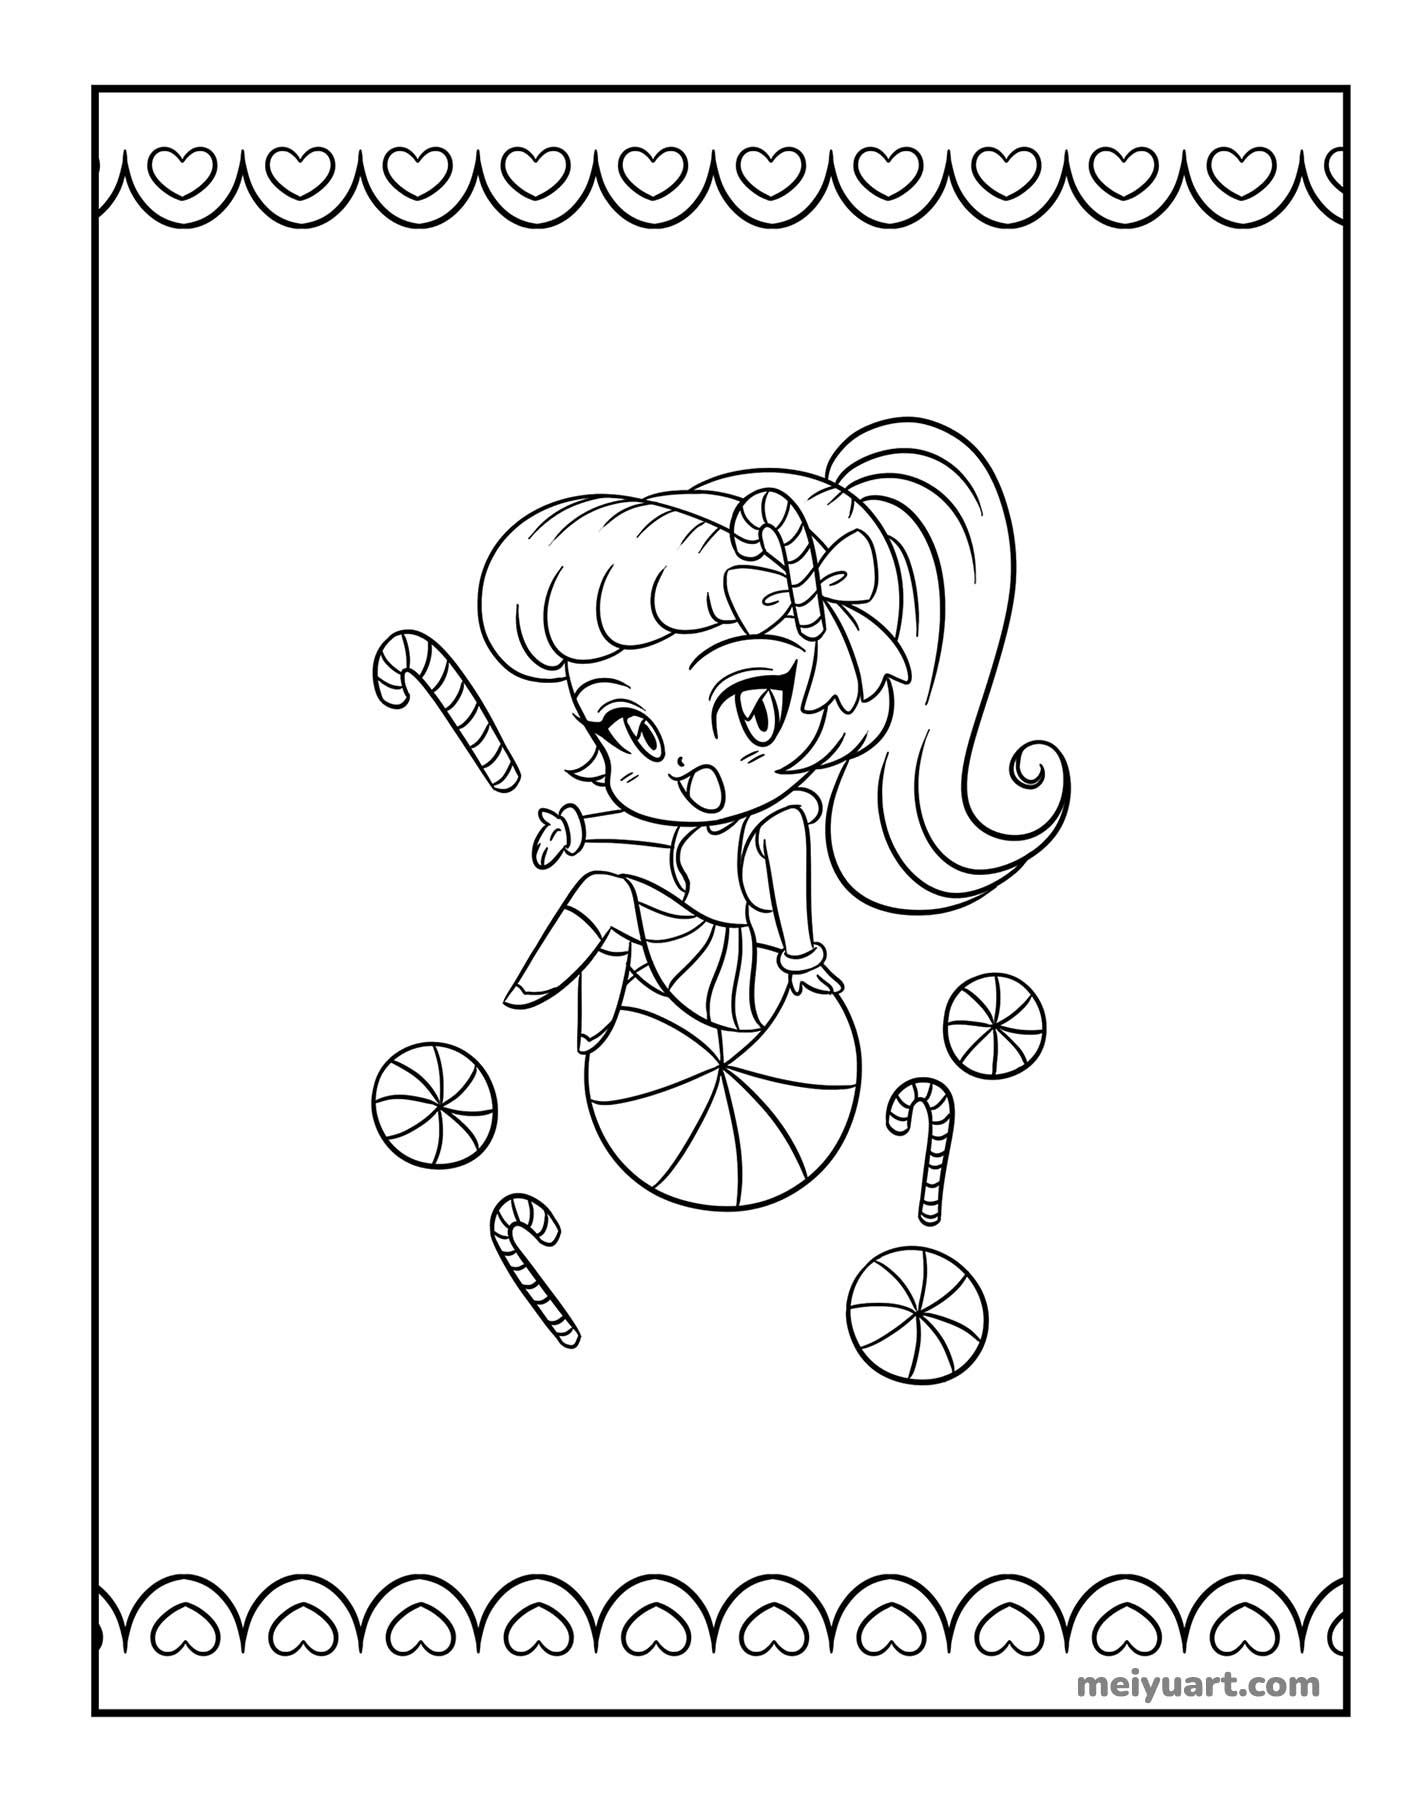 Free coloring card download from one of Mei Yu's coloring books